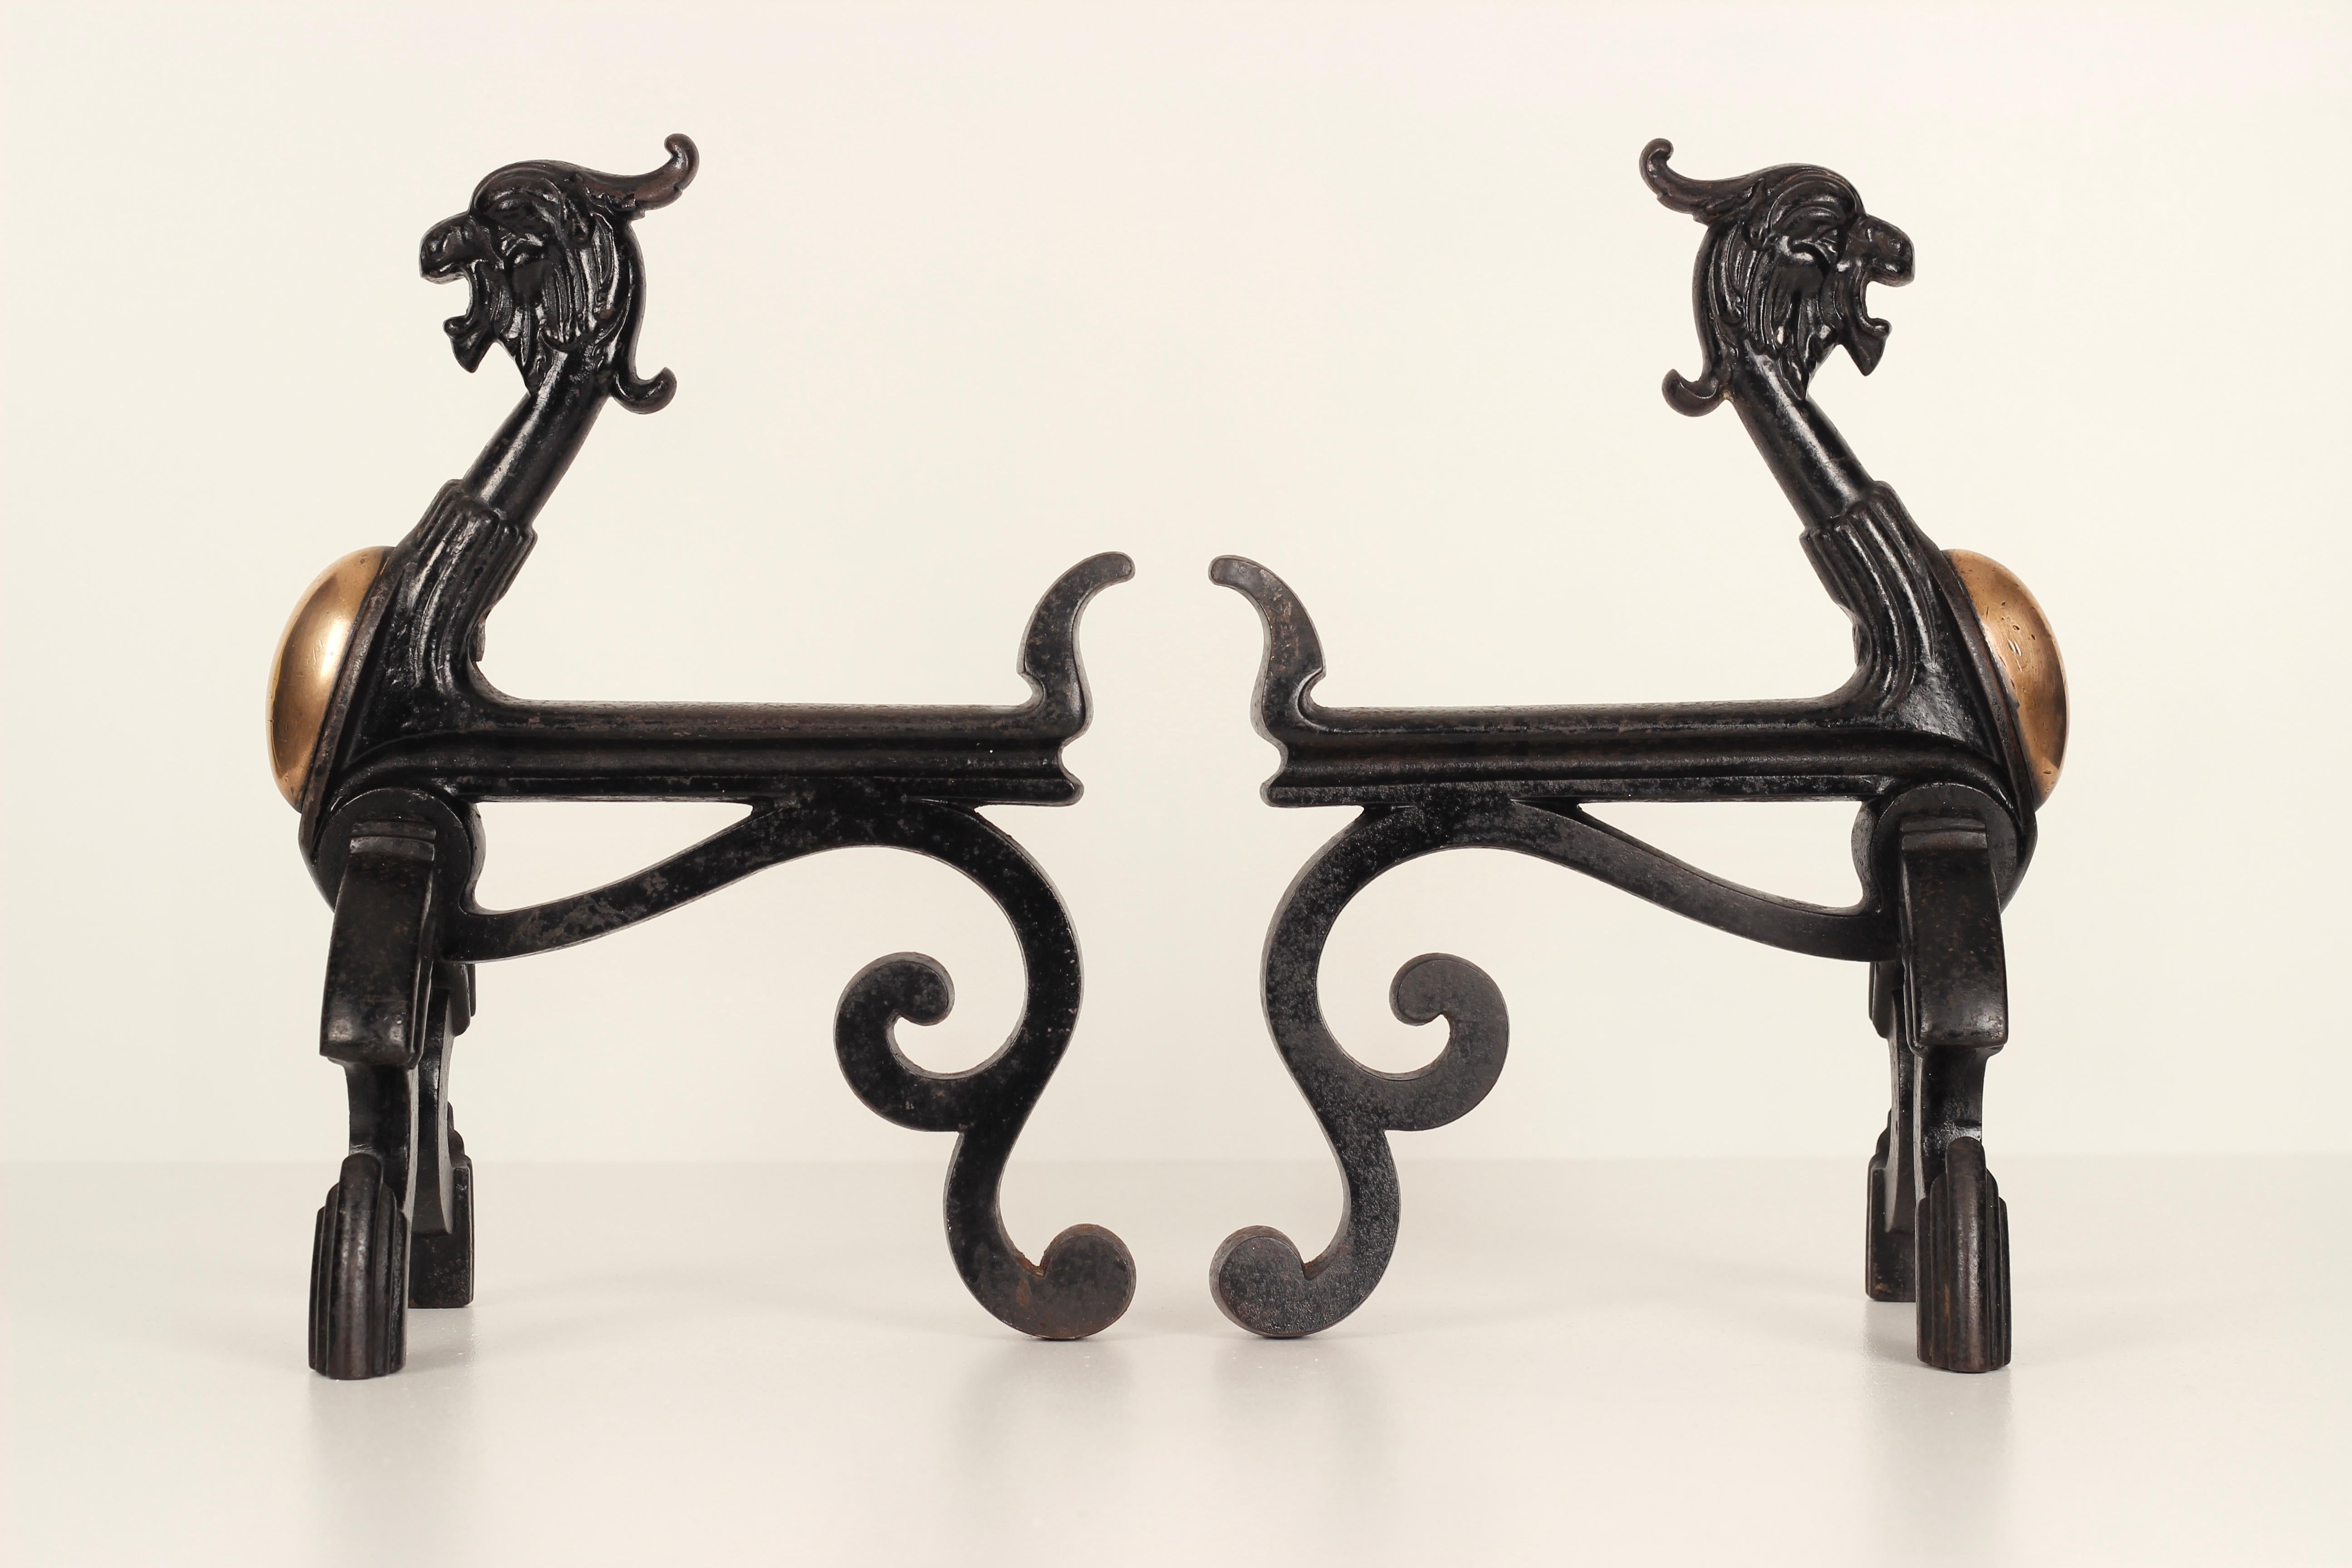 A mid 19th century pair of zoomorphic Griffin Fire Dogs or Andirons. Made from cast Iron and with copper stomach inserts, these unusual and rare pieces are indicative of the Victorian Gothic (or Victorian revivals) love of the romanticism of the